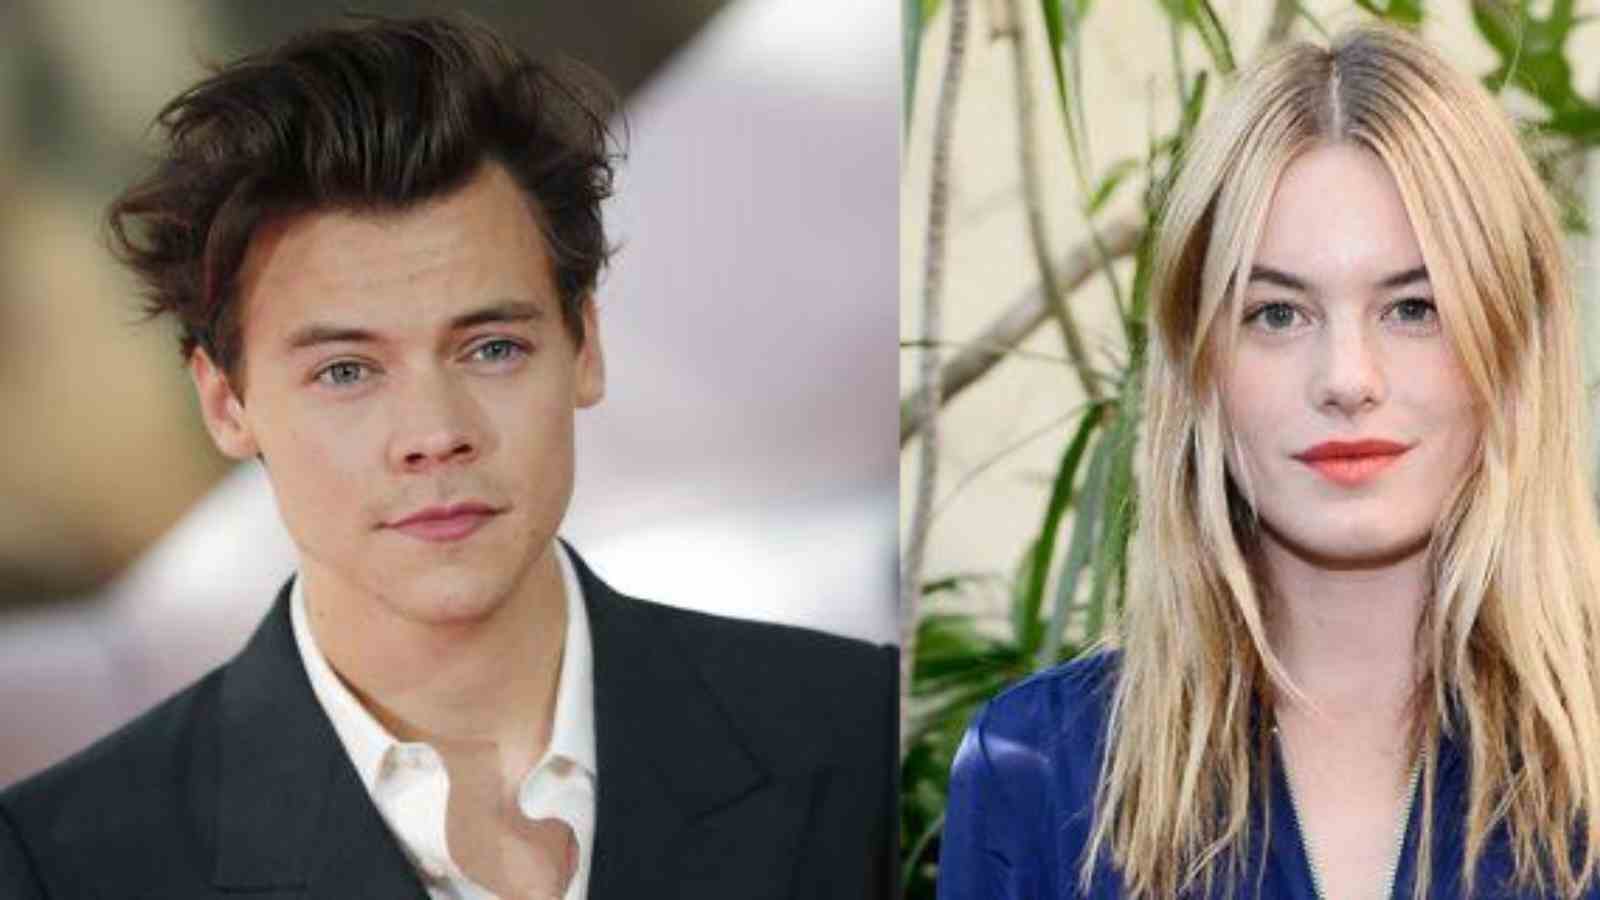 Harry Styles dated Camille Rowe for a year